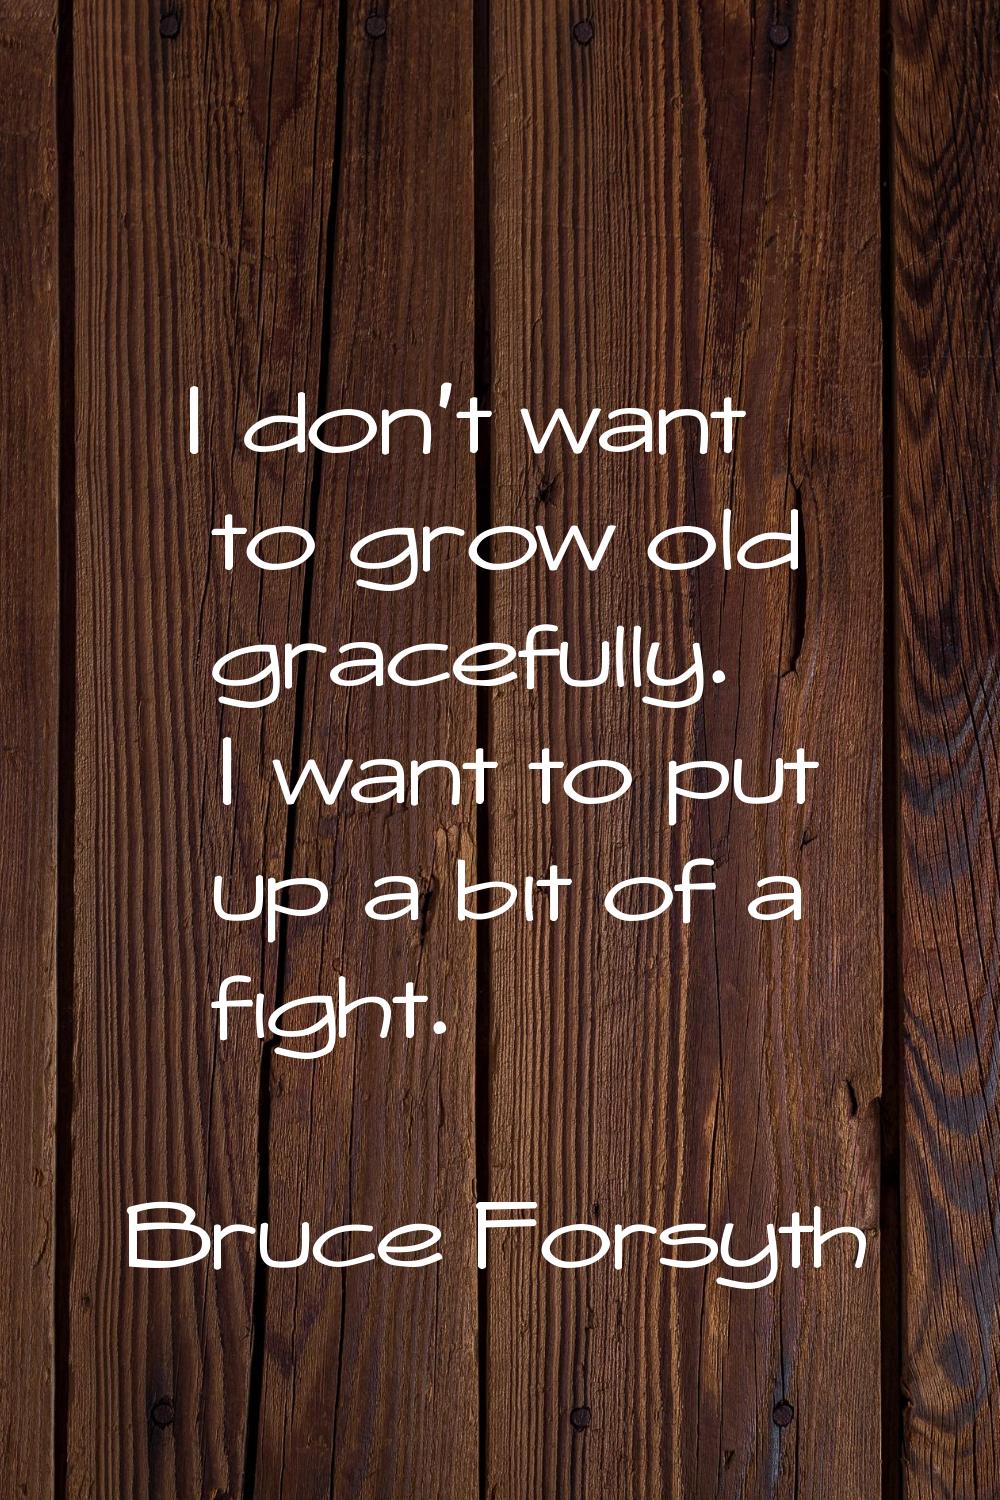 I don't want to grow old gracefully. I want to put up a bit of a fight.